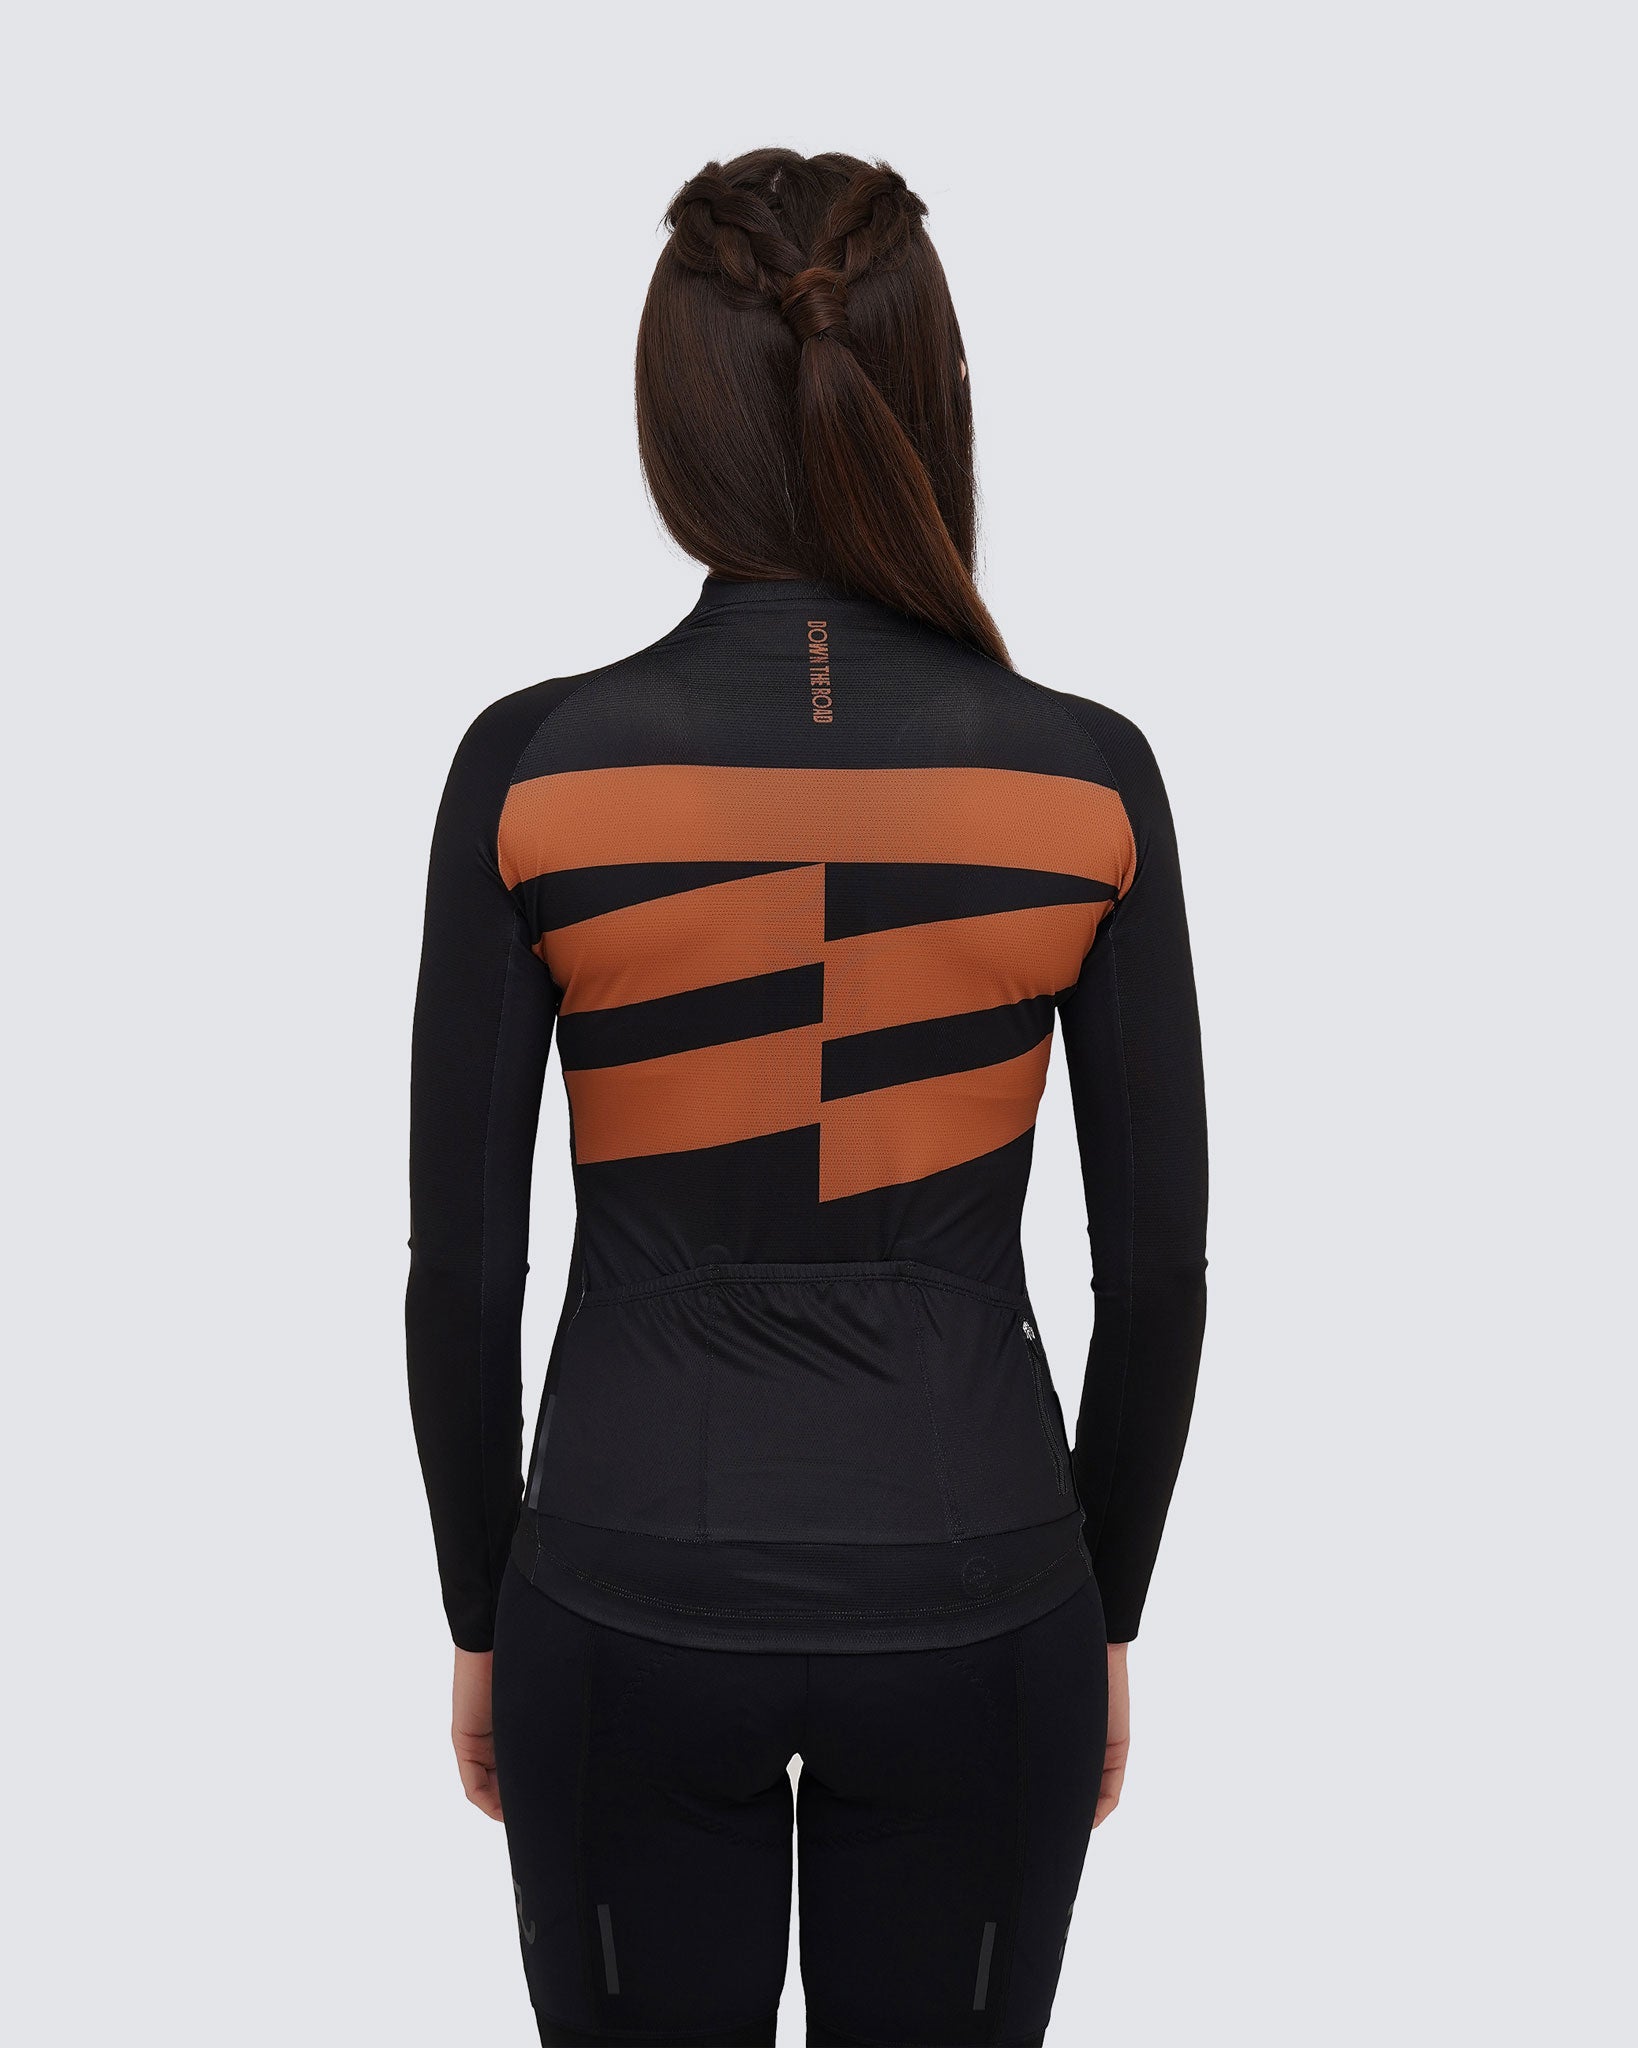 back view of black long sleeve cycling jersey for women 